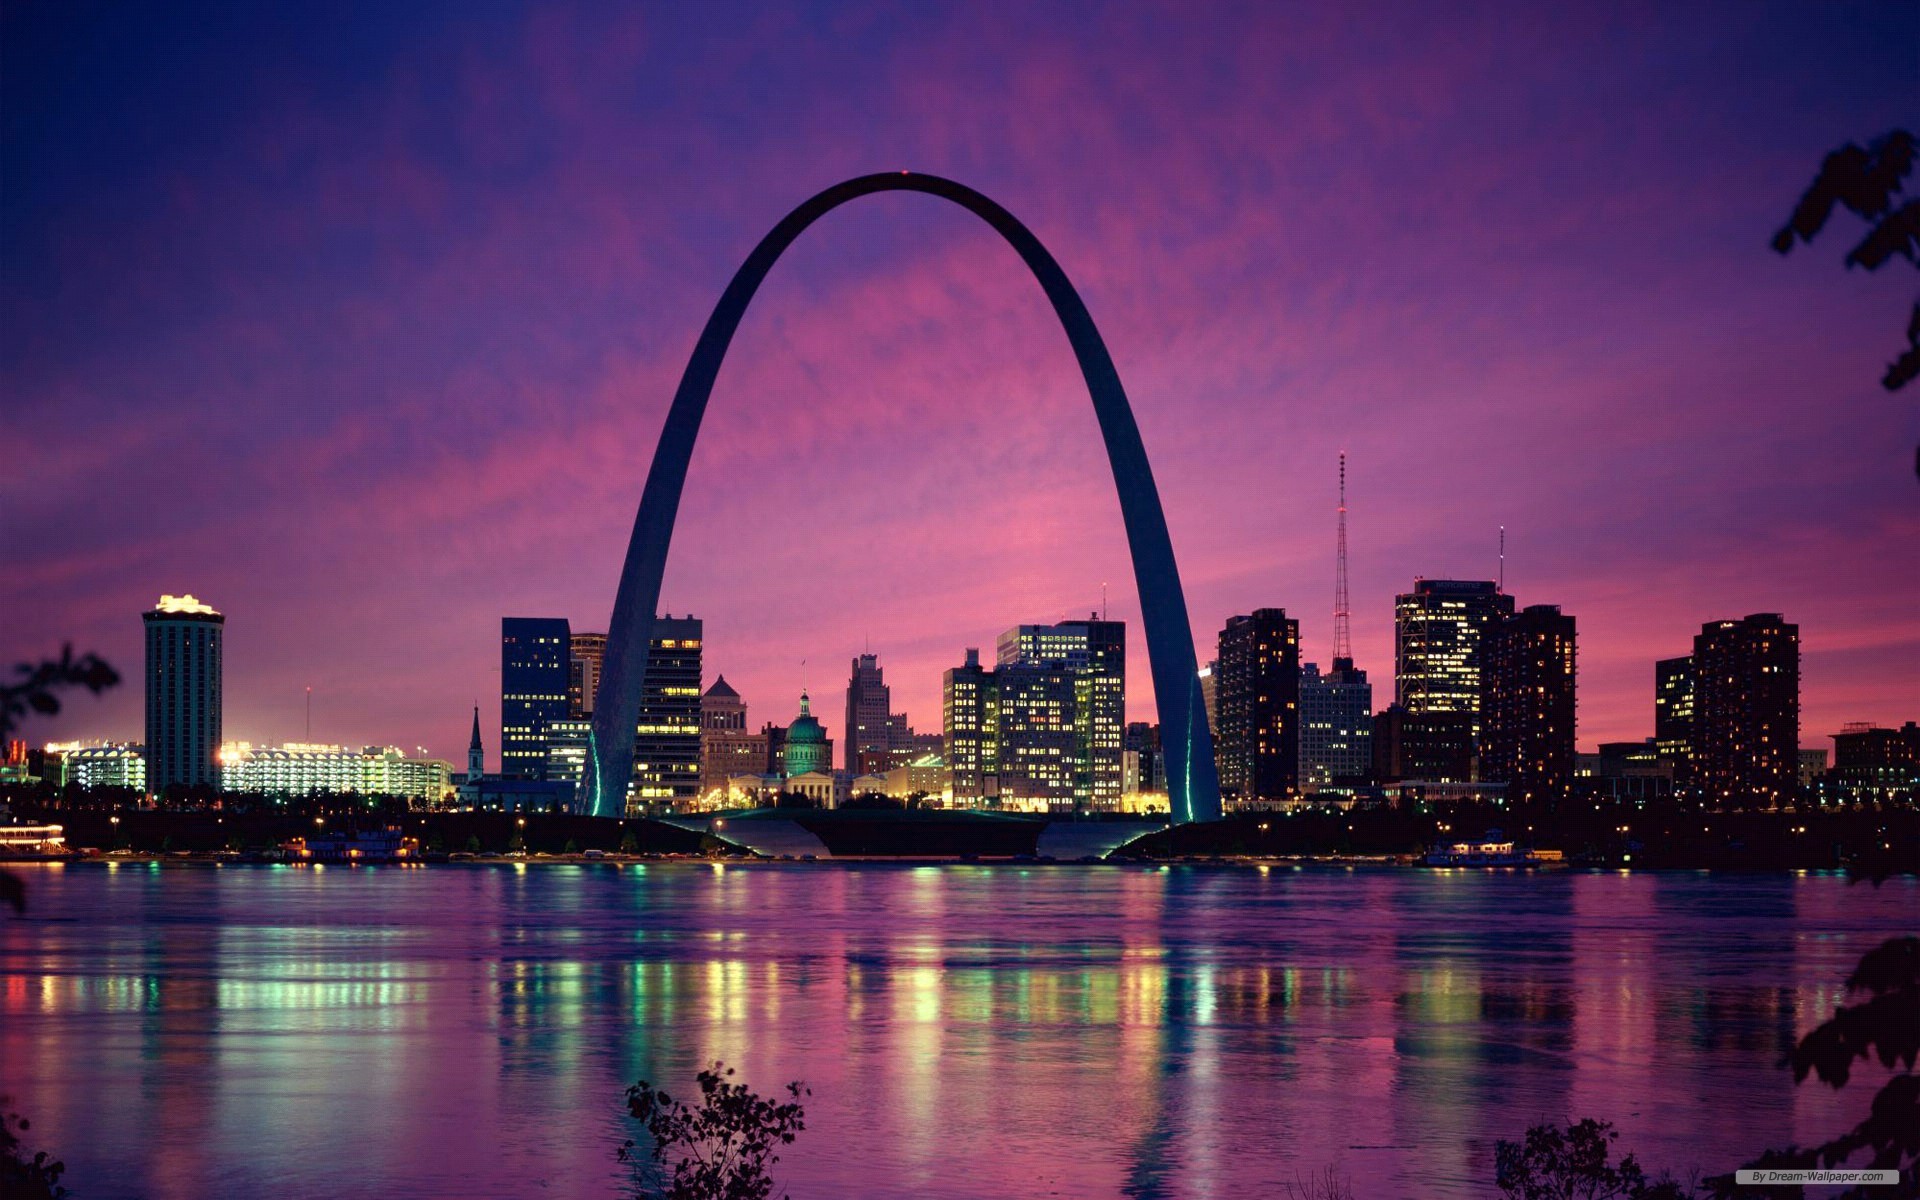 The Arch in St. Louis – A Pondering Mind